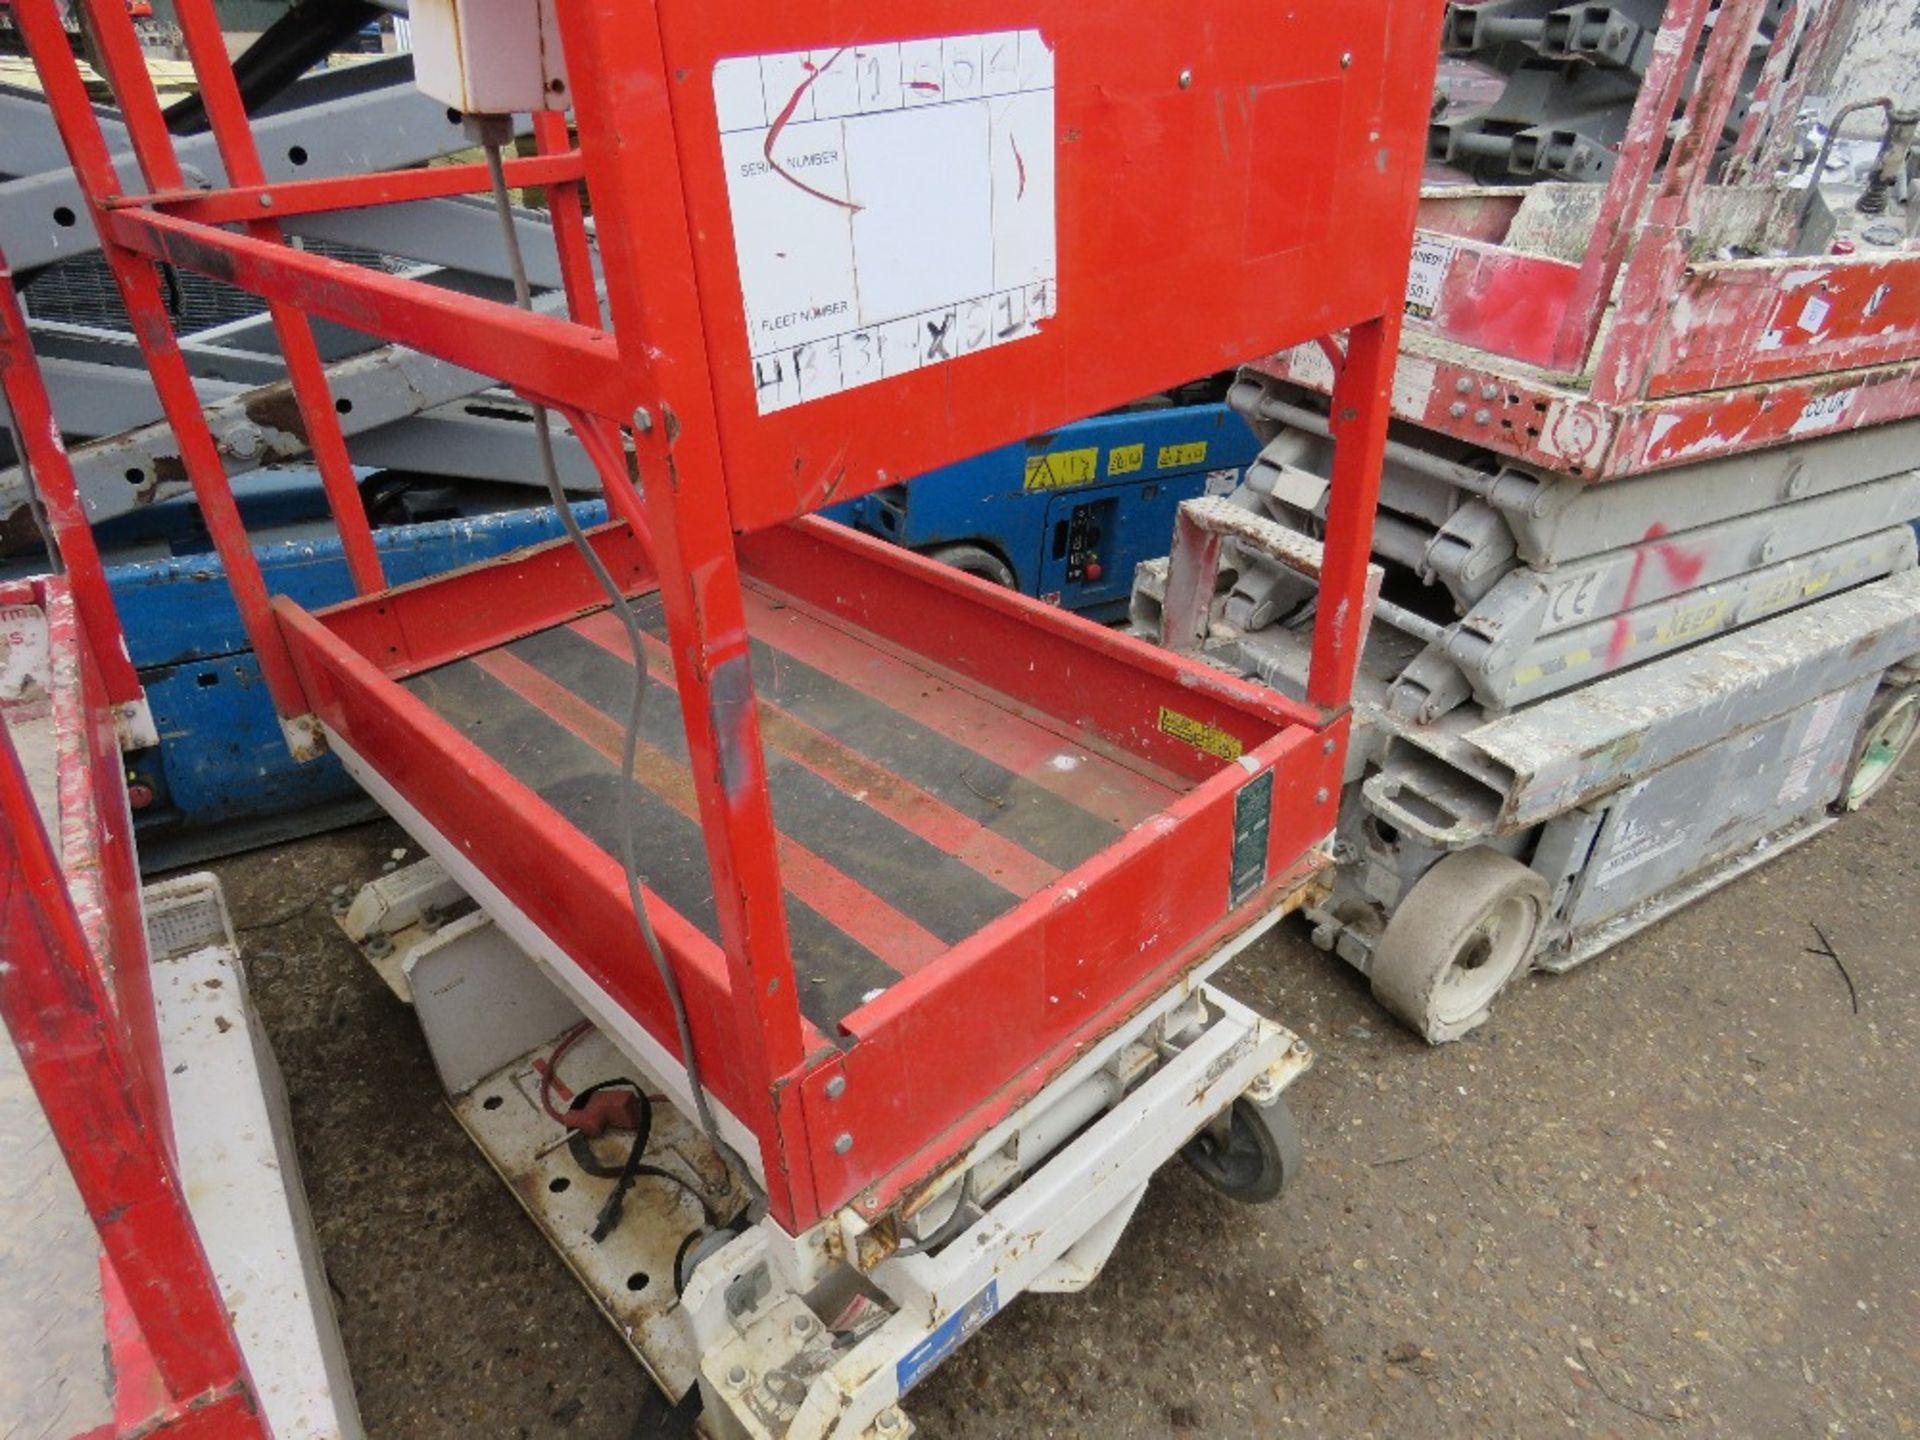 HYBRID HB830 SCISSOR LIFT ACCESS PLATFORM, 14FT MAX WORKING HEIGHT. SN:E0510647. UNTESTED, CONDITION - Image 2 of 2